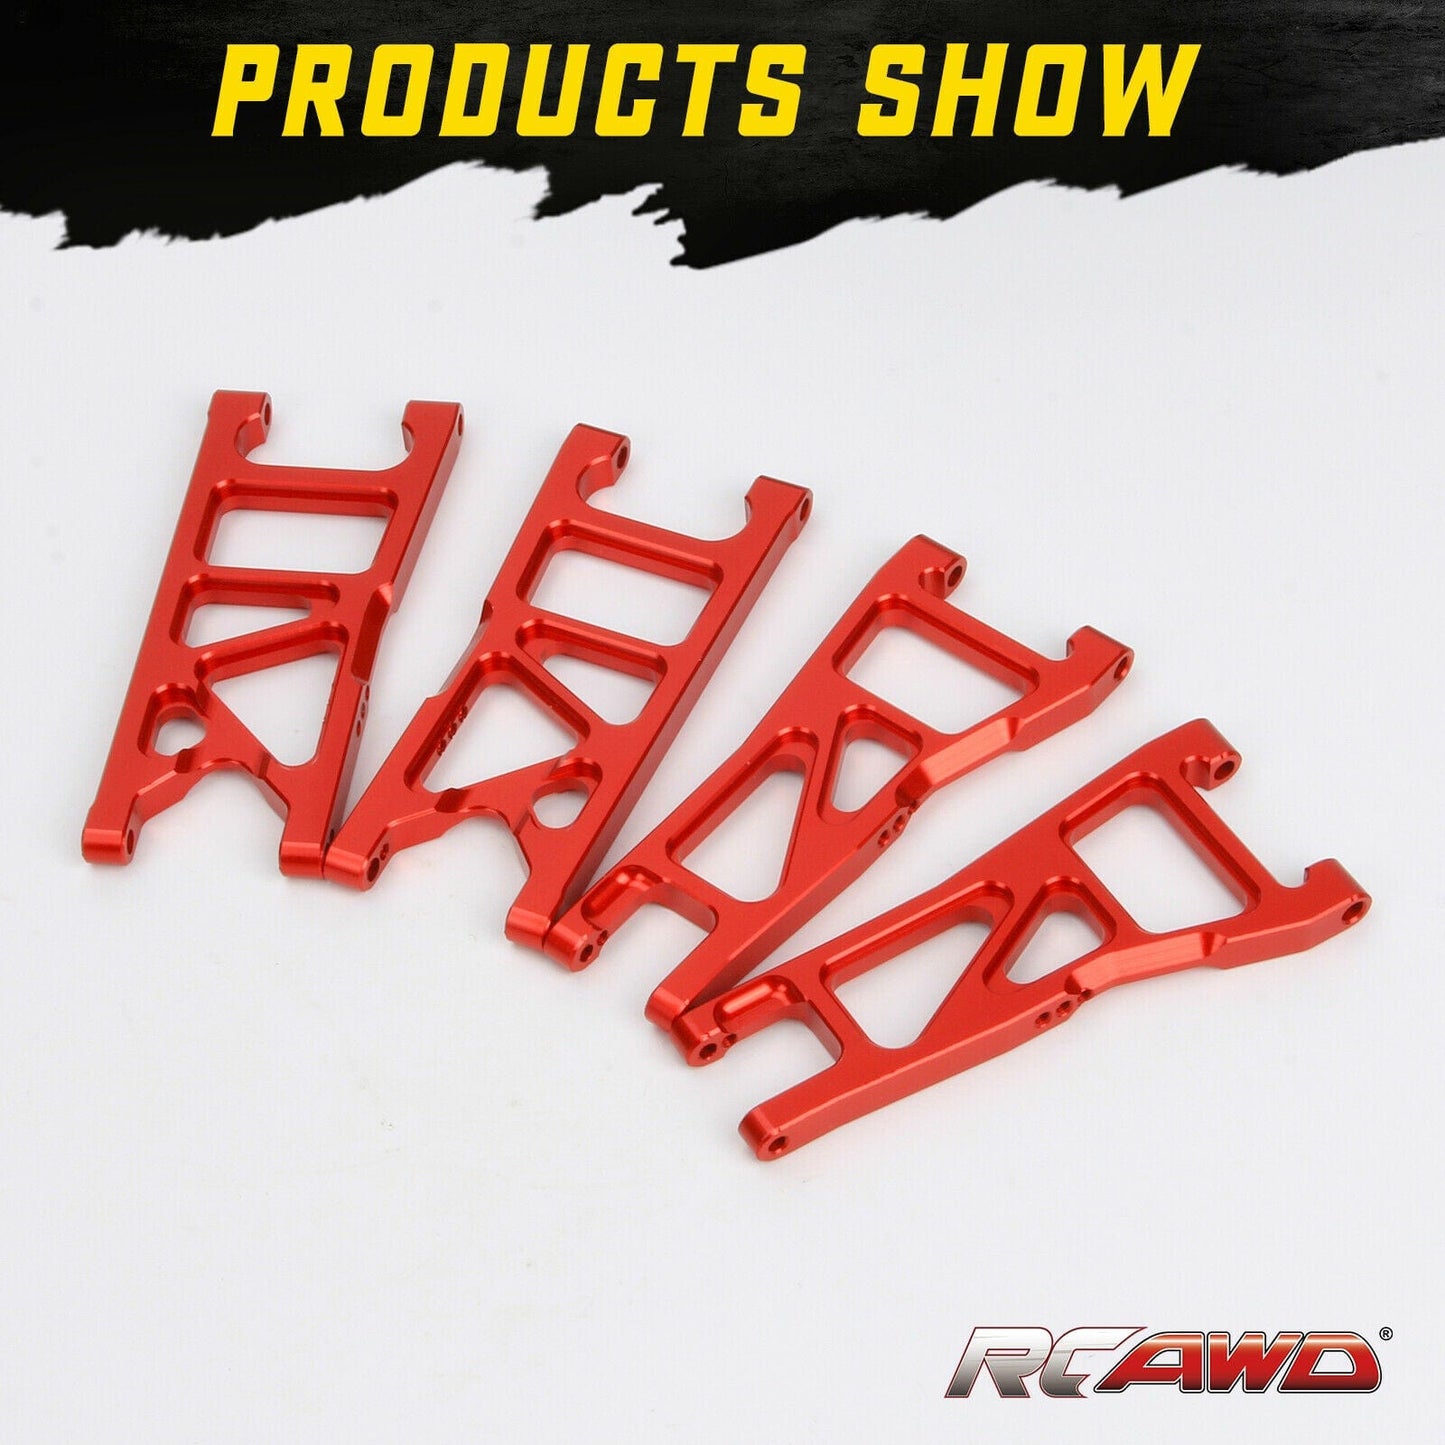 RCAWD ARRMA UPGRADE PARTS RCAWD AR330540 AR330543 rear front suspension arms for arrma Typhon 3S BLX MEAG